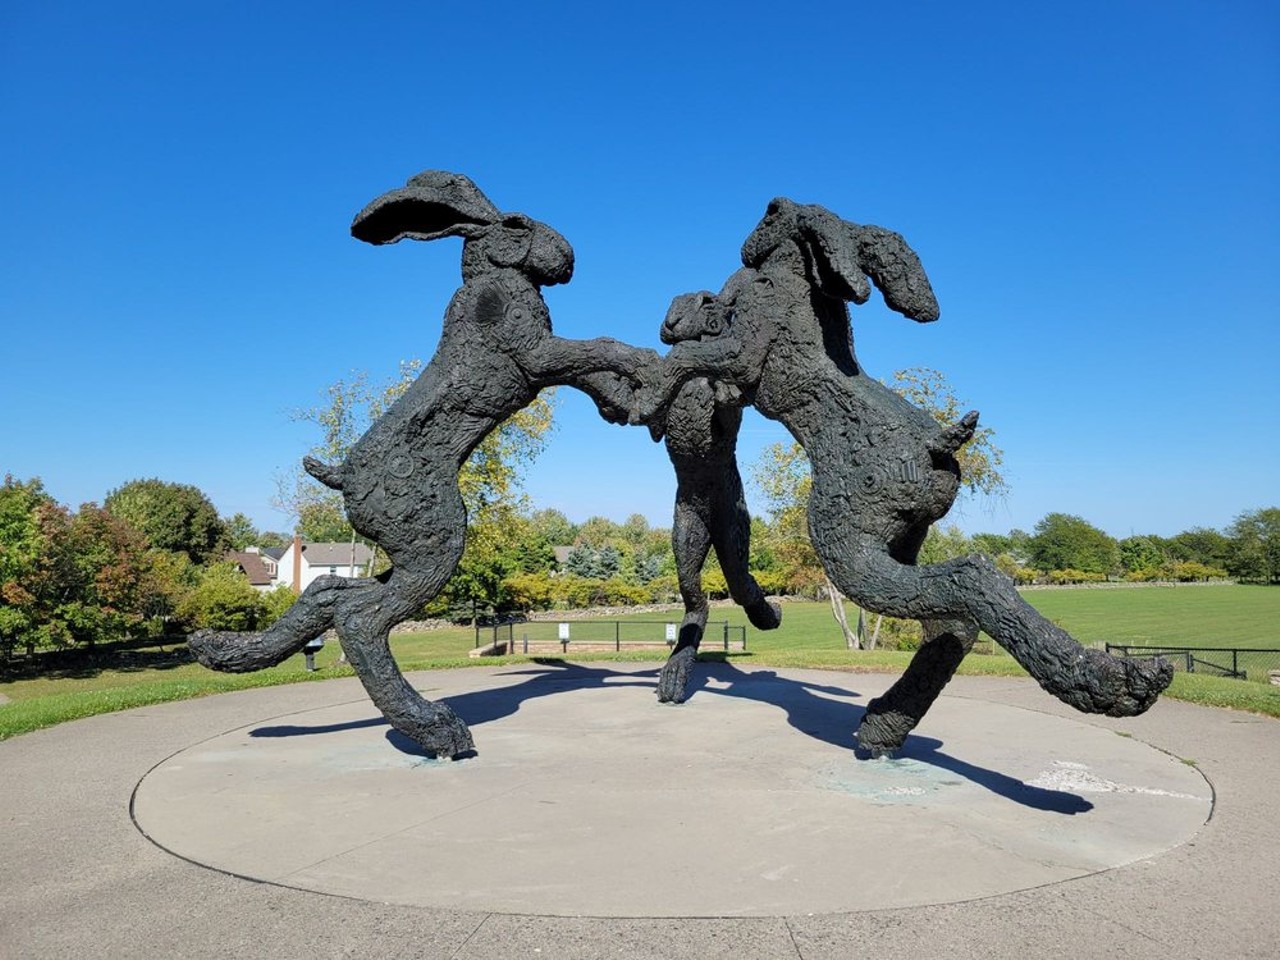  Giant Dancing Rabbits
6350 Woerner Temple Rd., Dublin
In the Columbus suburb of Dublin, you’ll find the Ballantrae Giant Dancing Hares which were made by English artist Sophie Ryder in 2001. The trio of rabbits are 24-feet tall.